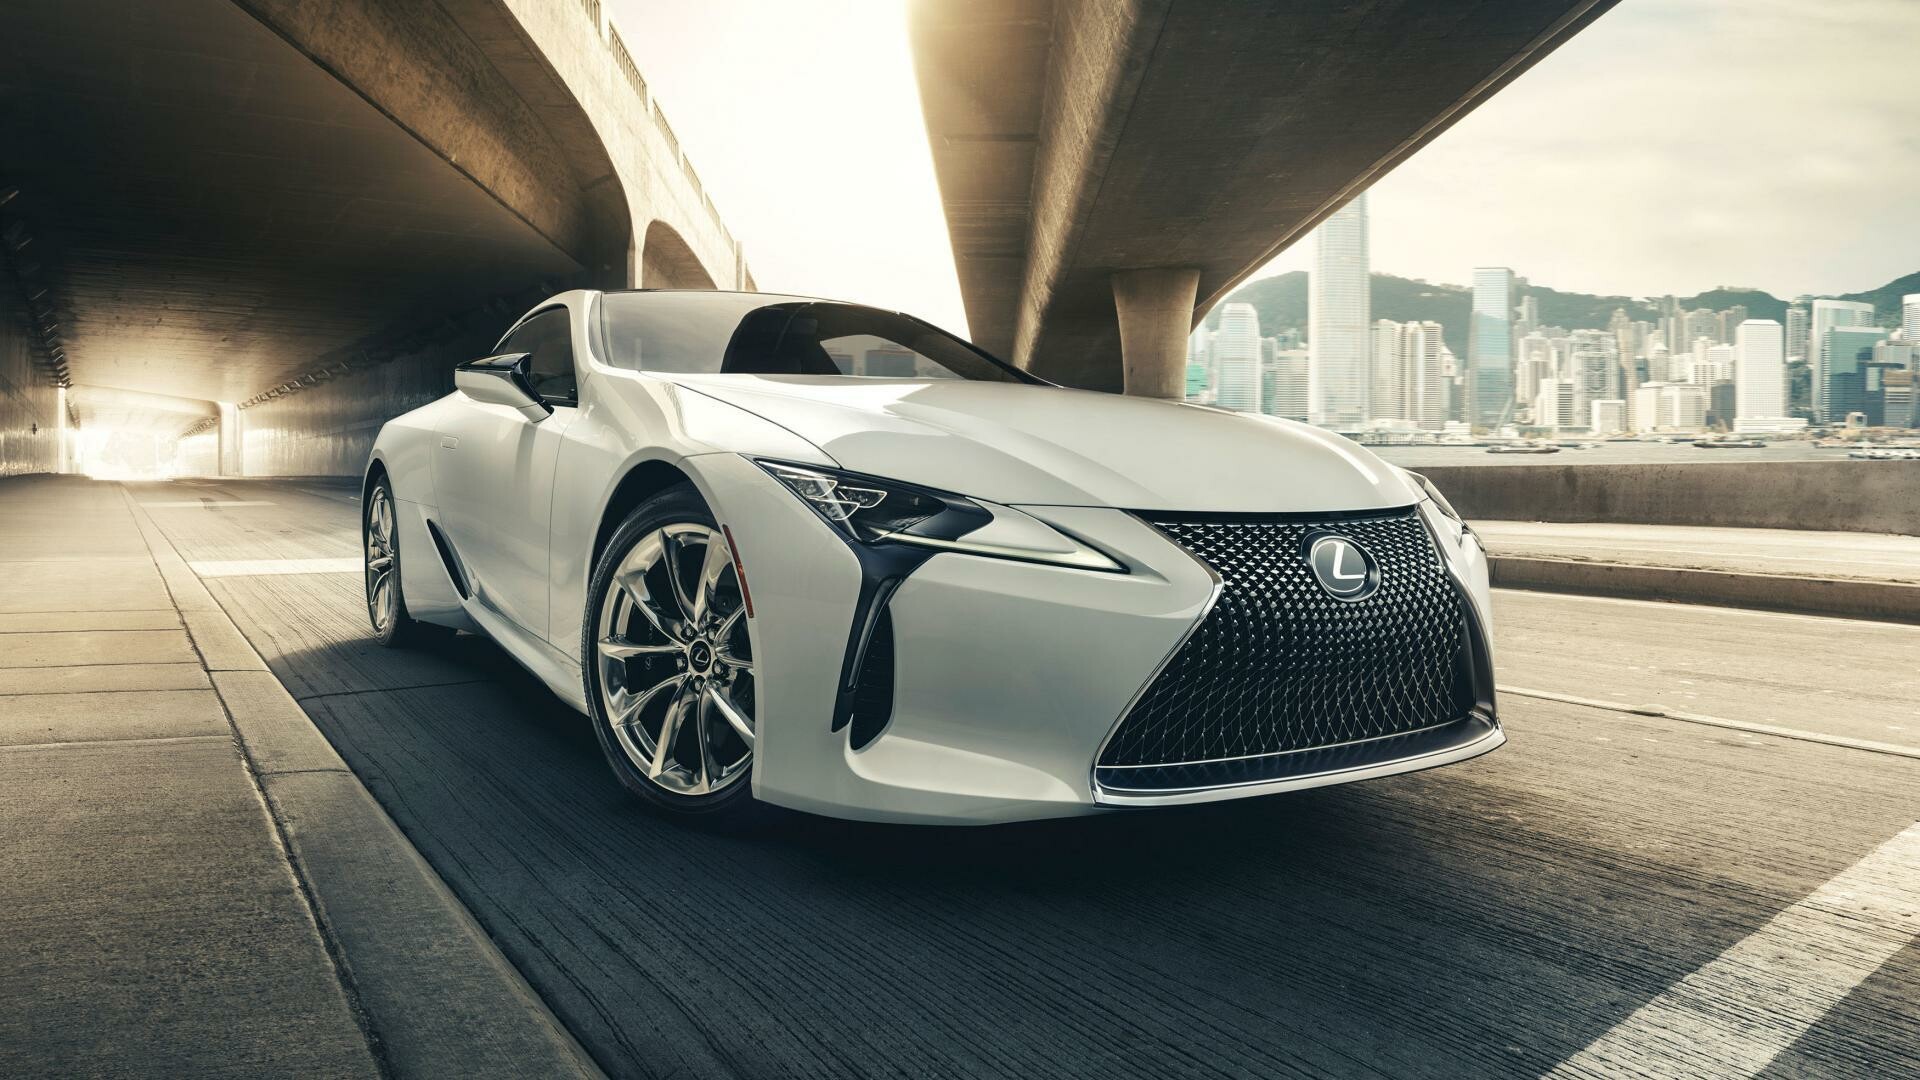 Lexus: Known as a luxury brand, its vehicles stand out for their performance and handling capabilities. 1920x1080 Full HD Wallpaper.